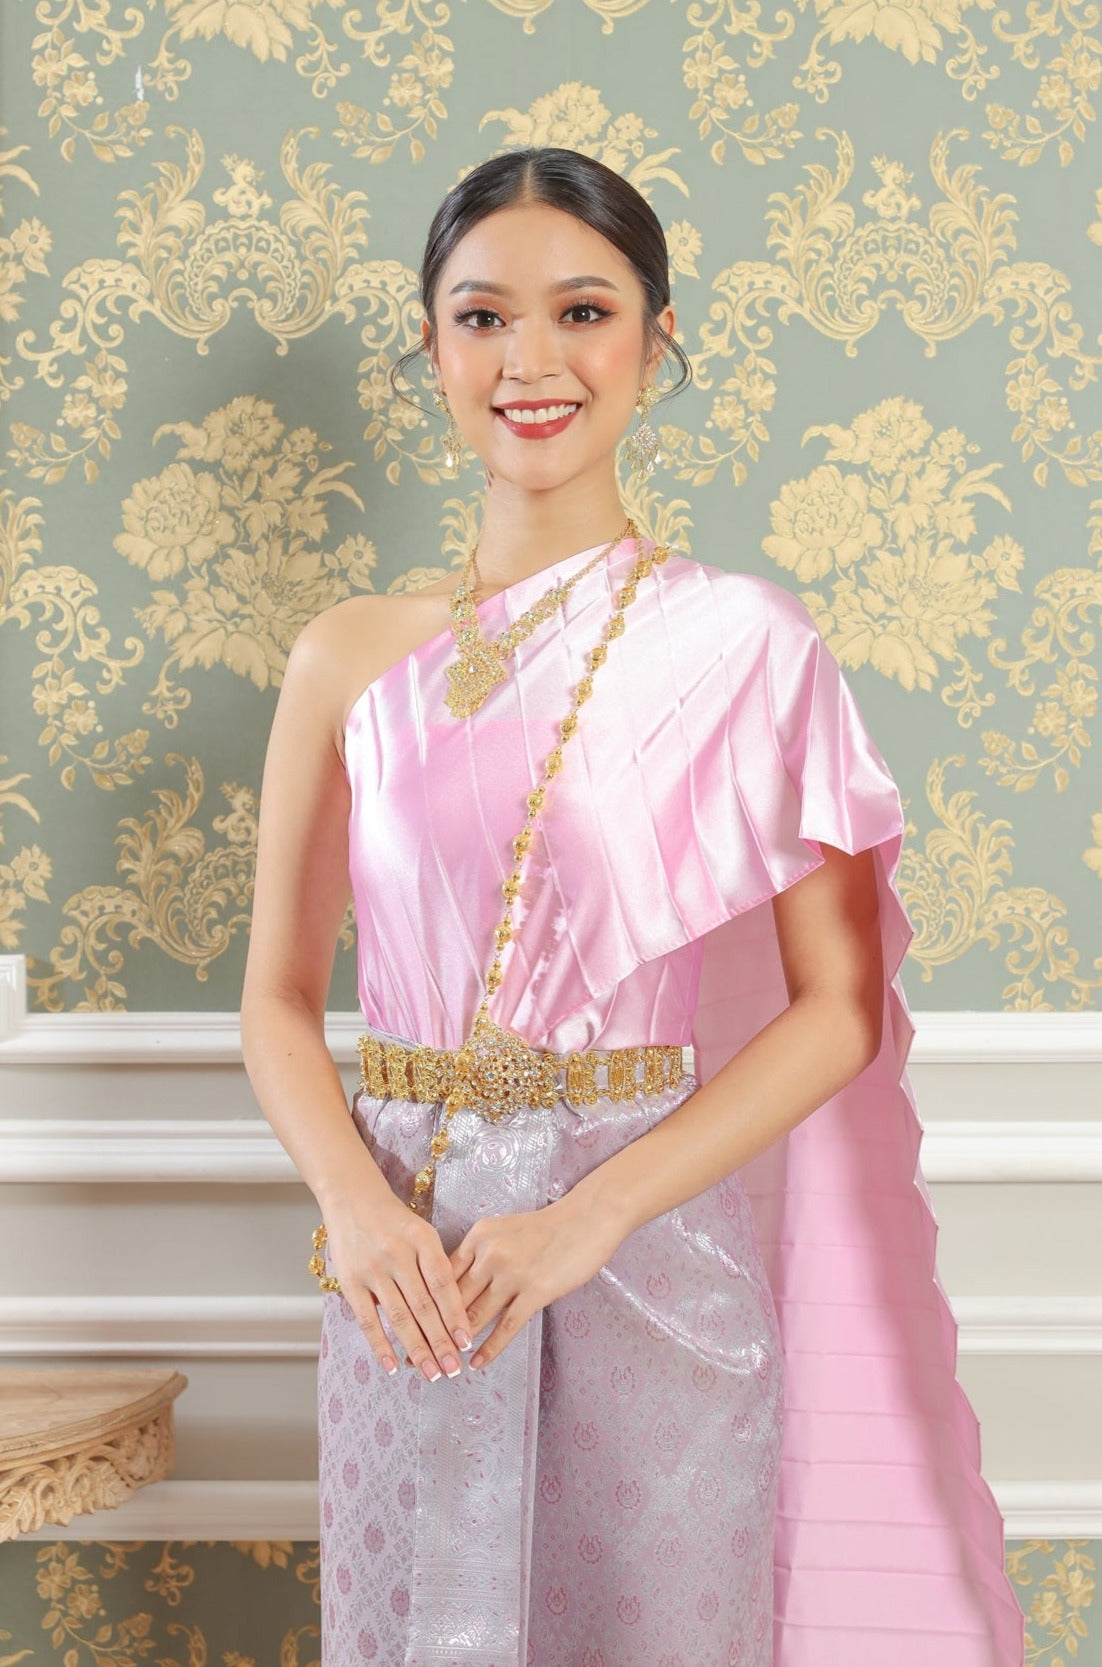 Handwoven Thai traditional clothing for women.